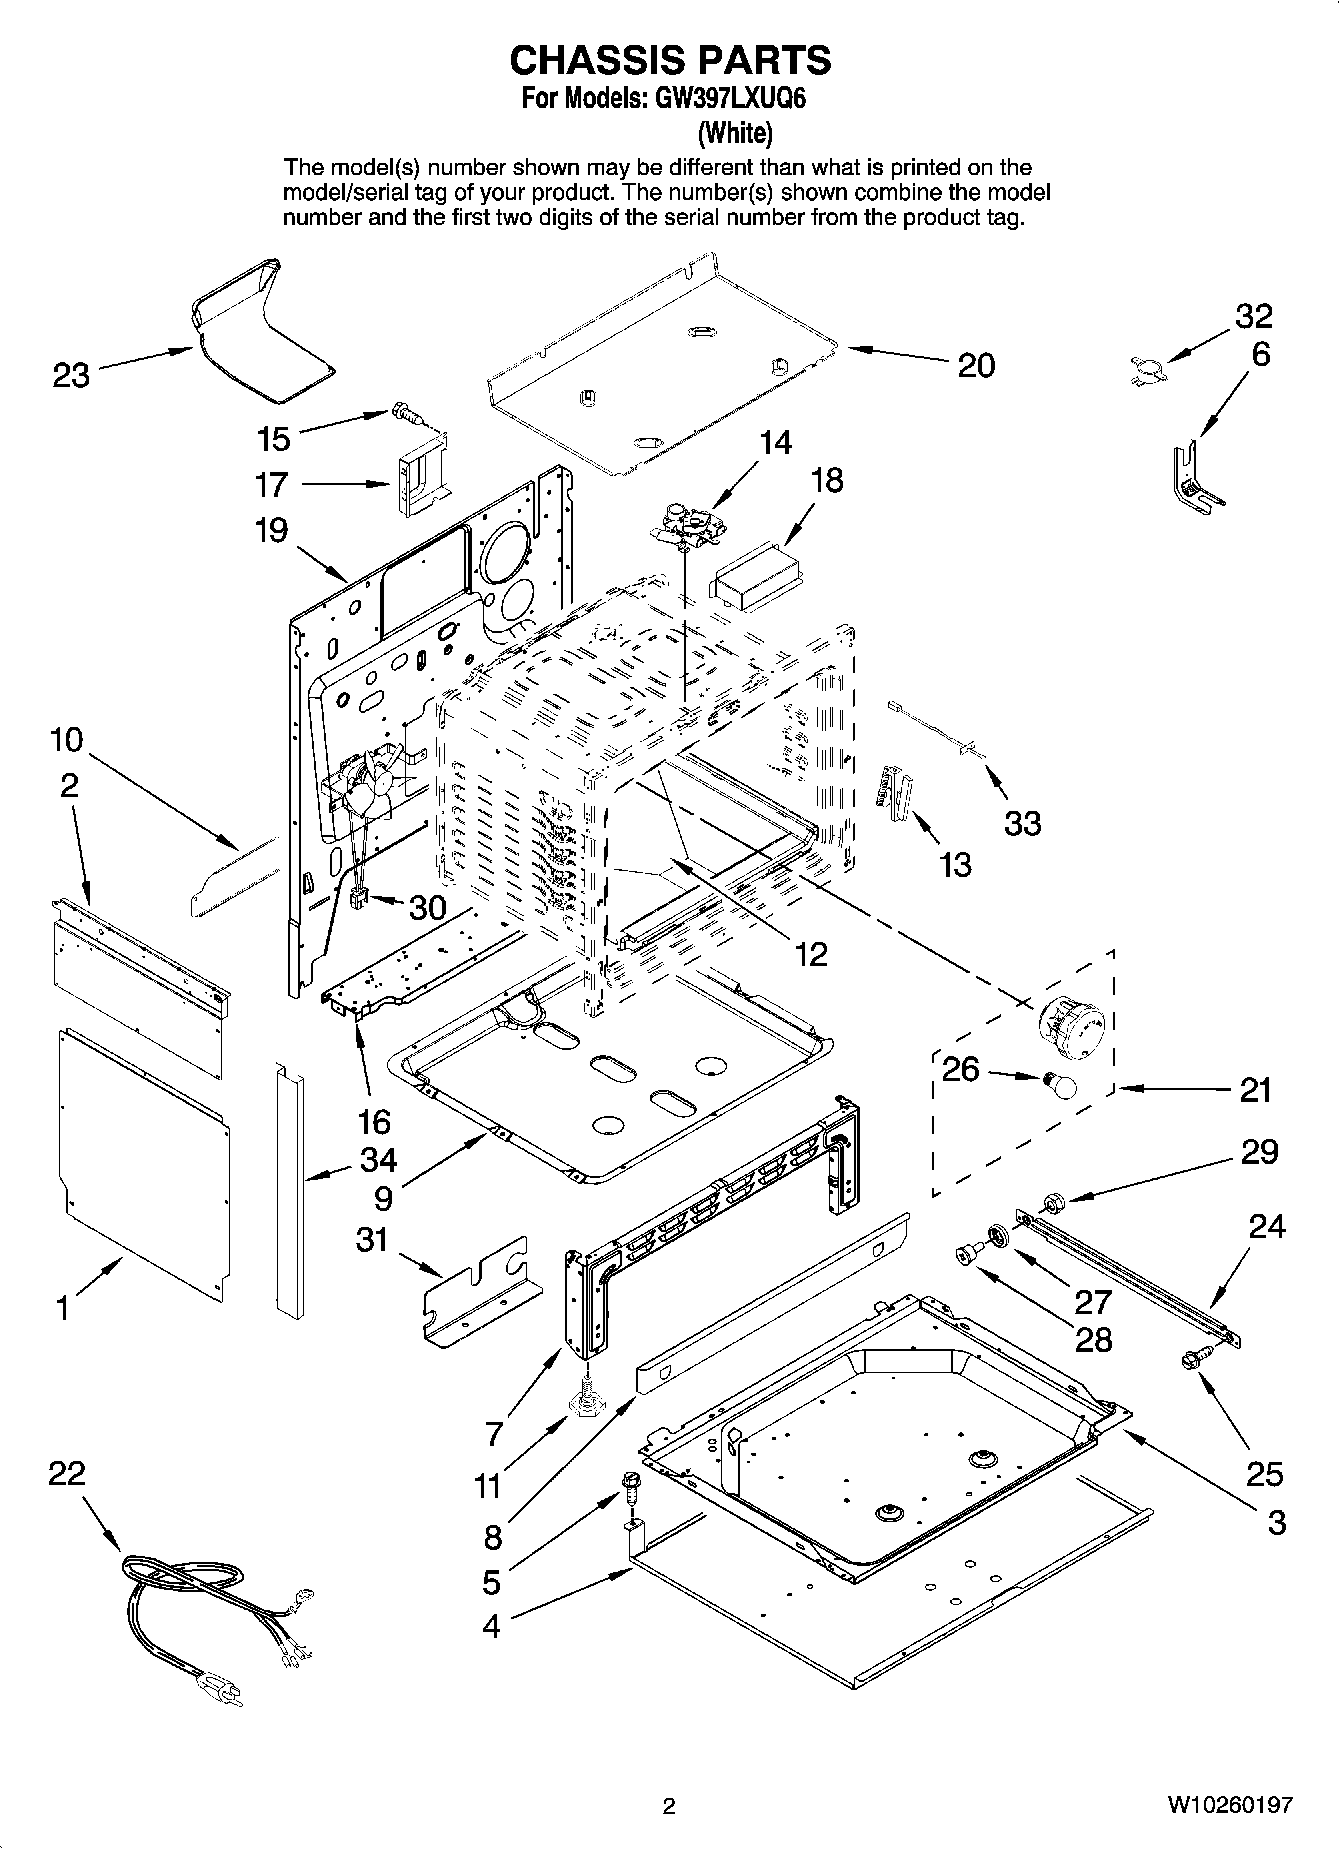 02 - CHASSIS PARTS